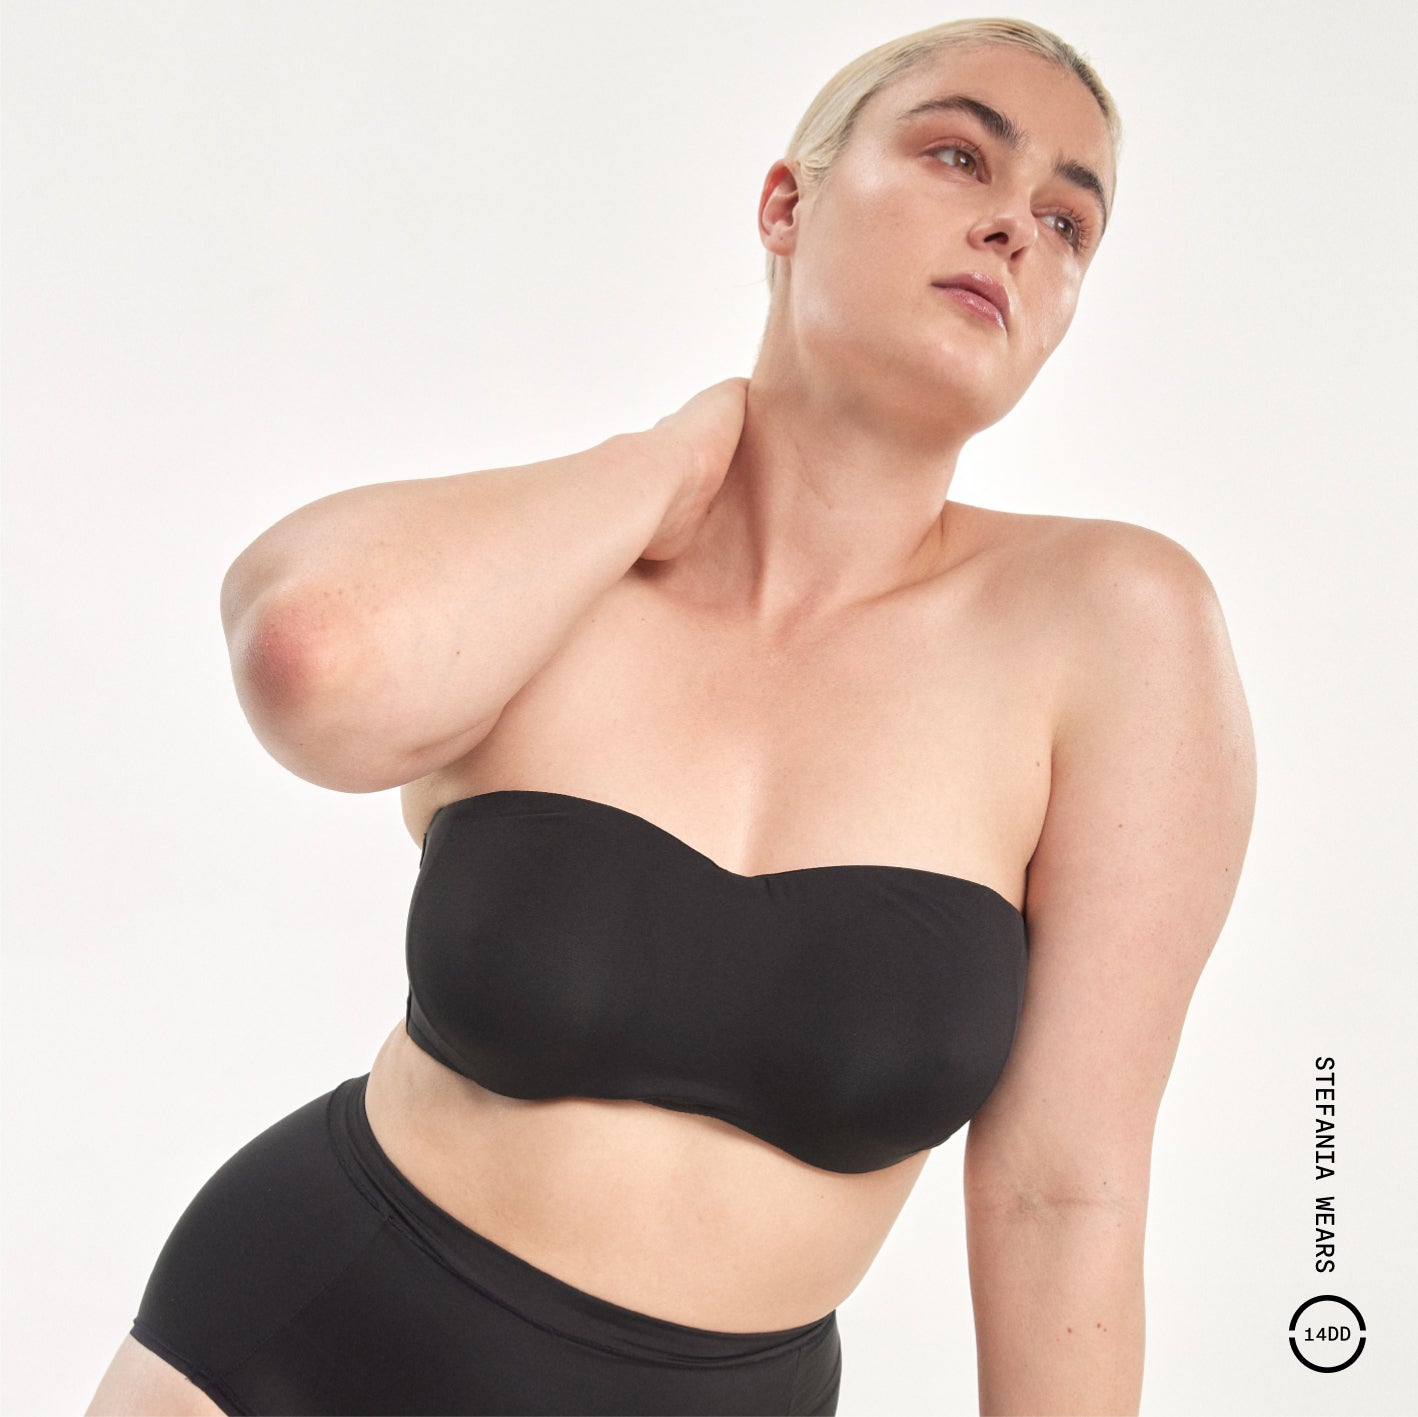 Day 24 🖤 a strapless option that goes down to 28 band size 👏  #smallbandlargecup #straplessbra #brareview